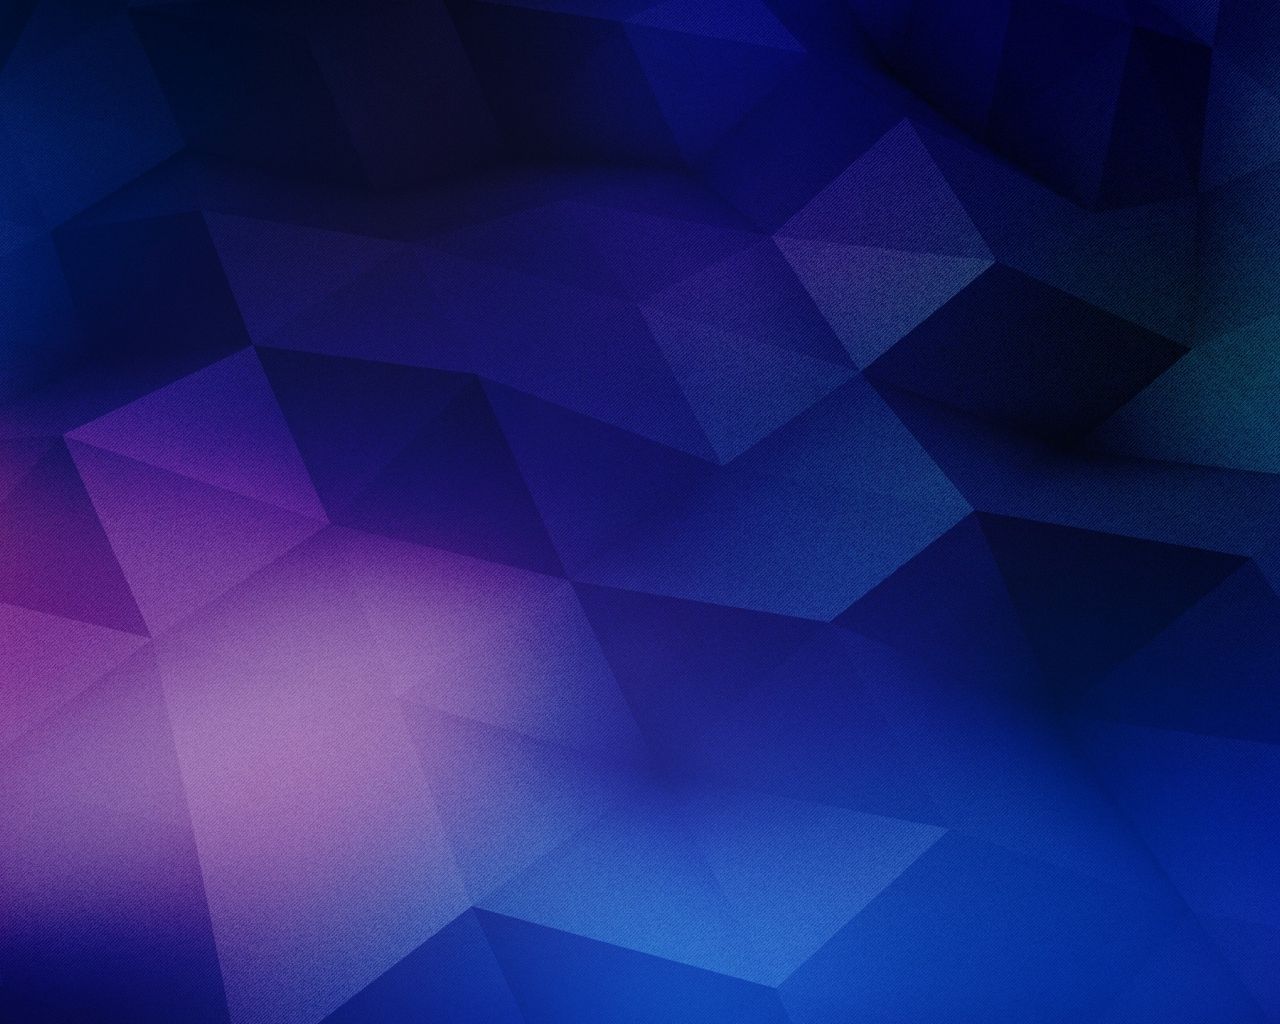 1280x1024 Free Download Blue And Purple Geometry Wallpaper In 3d Abstract Wallpaper 1280x1024 For Your Desktop Mobile Tablet Explore Purple And Blue Background Pink Purple And Blue Wallpaper